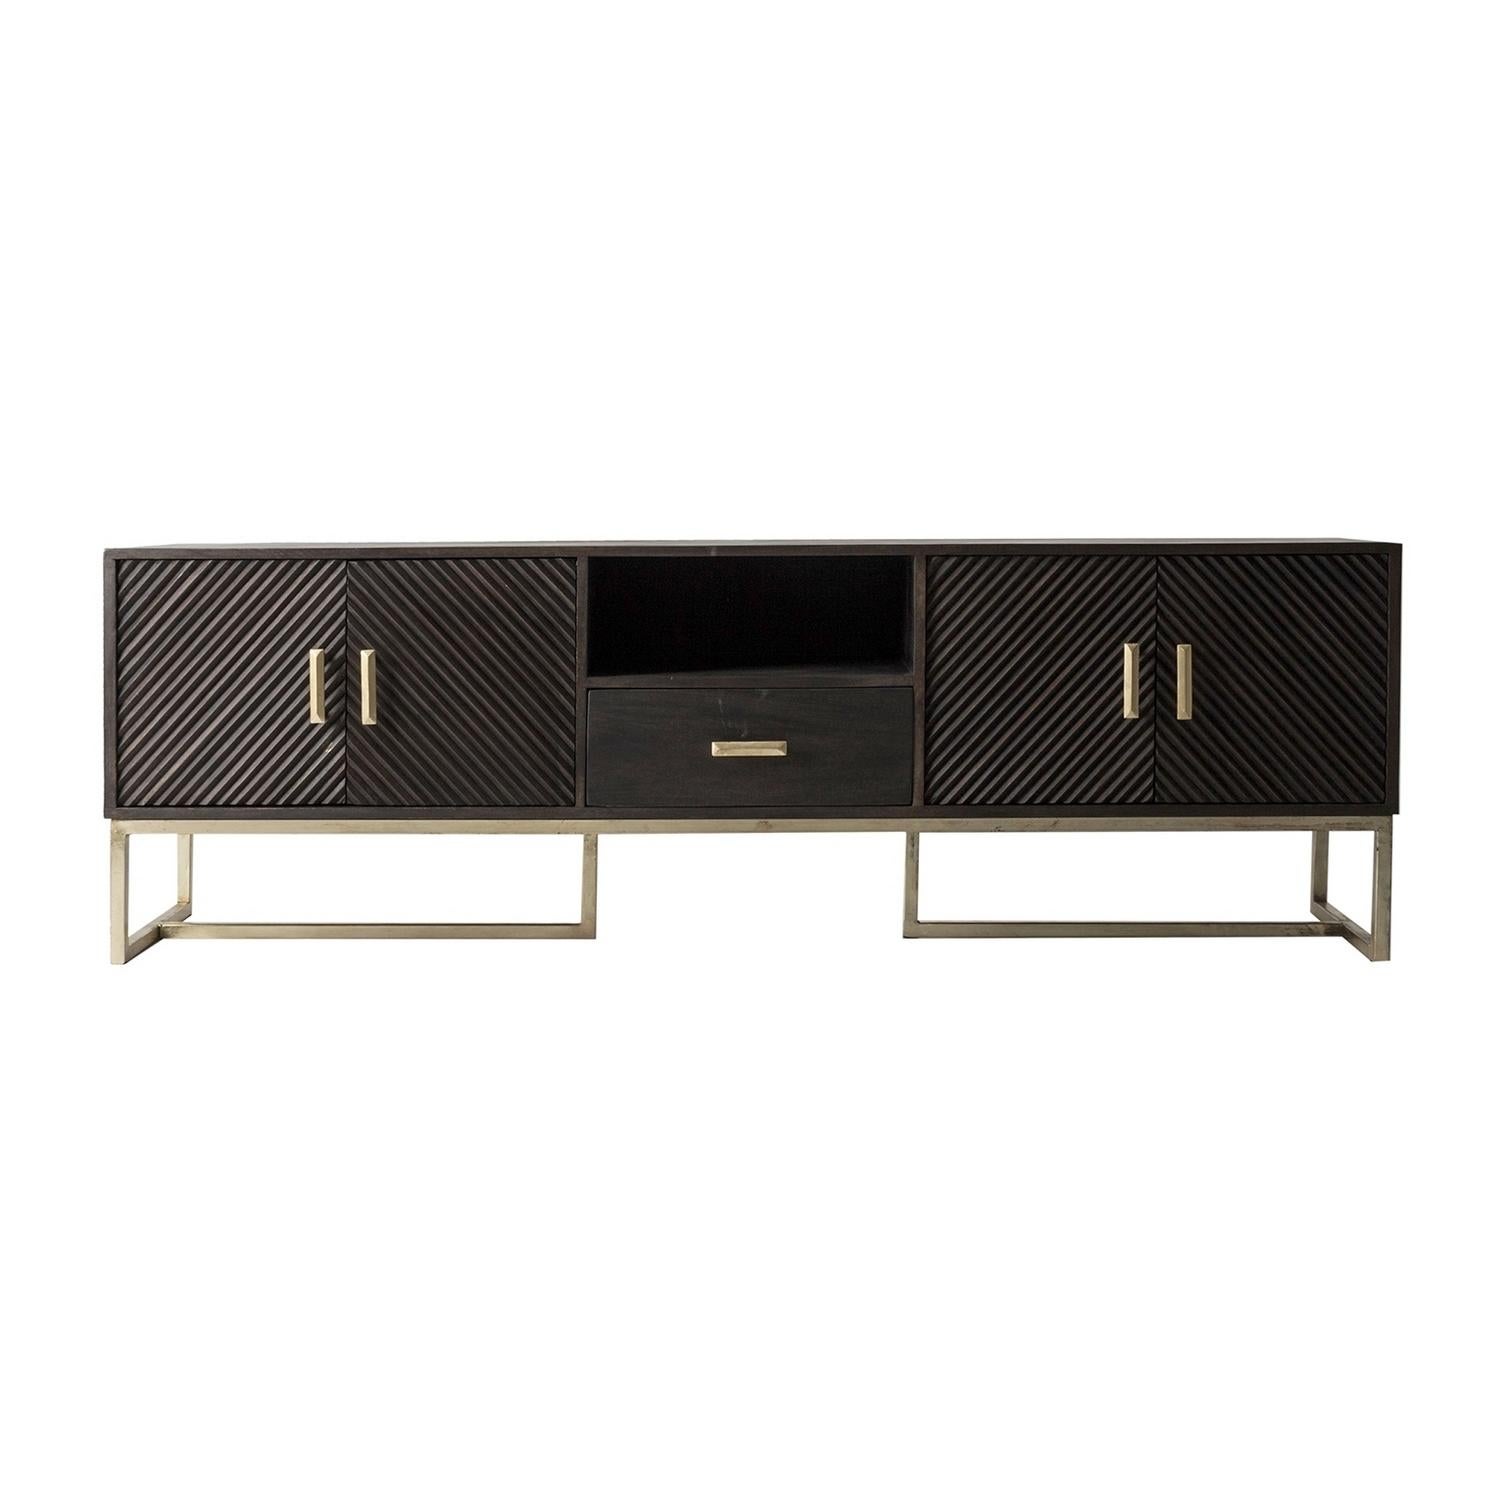 Wooden and metal sideboard with sleek design, gold patina feet and subtle work of the graphic doors with Brutalist style.